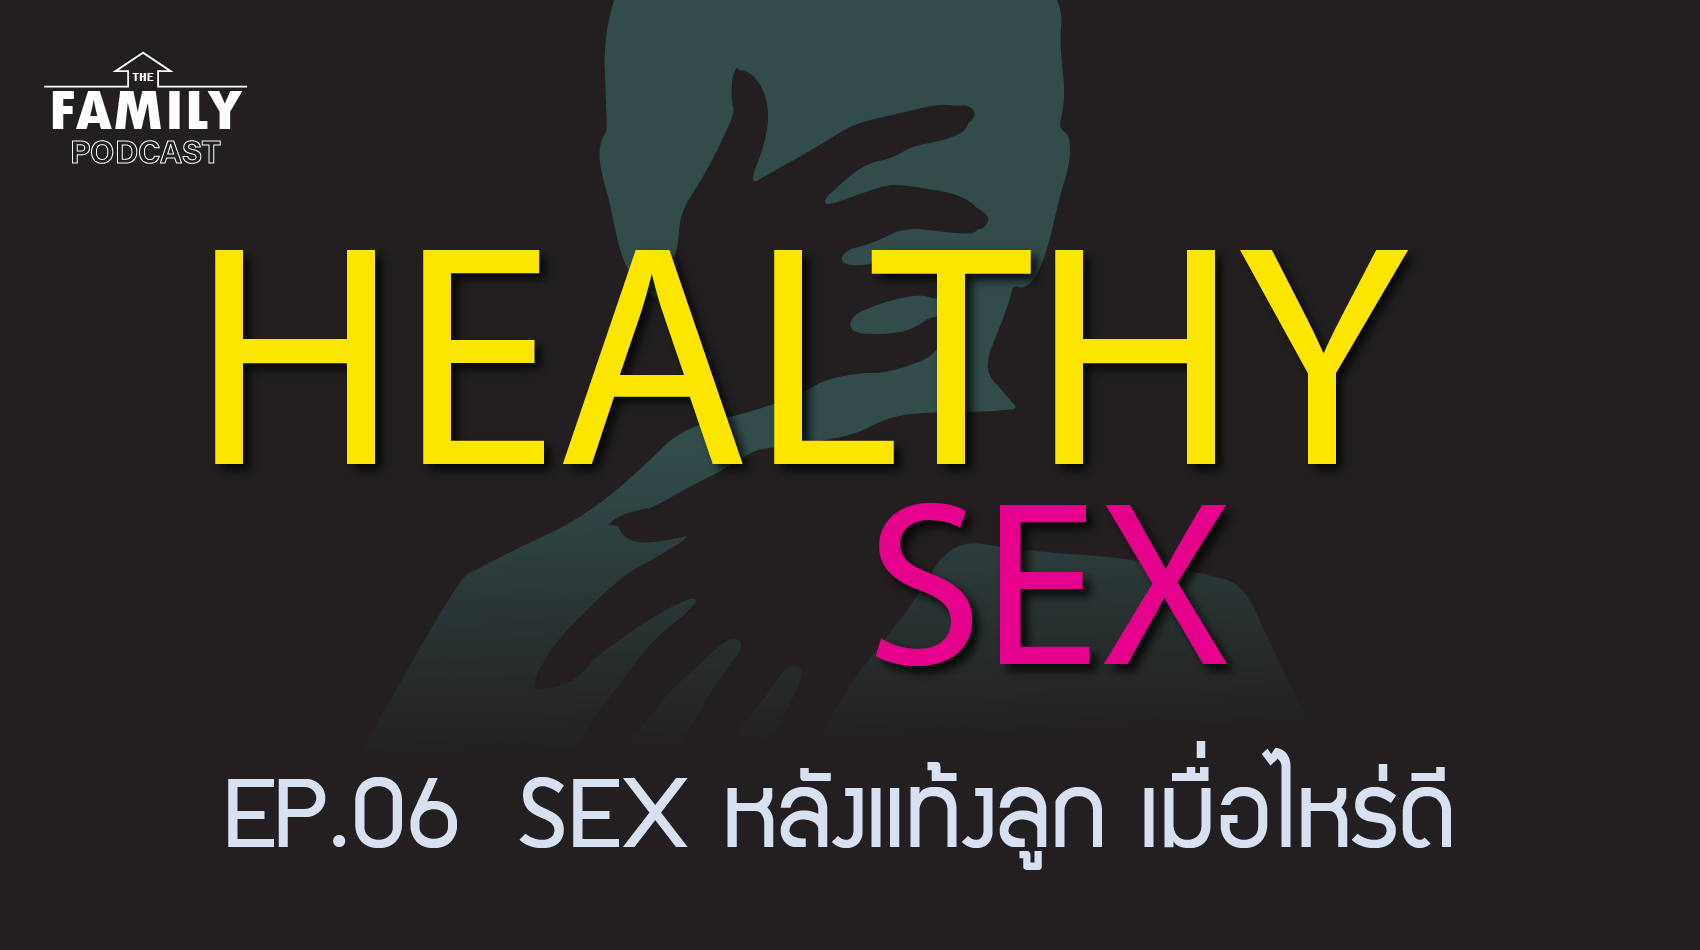 The Family Podcast Healthy Sex EP.06 Sex หลังแท้งลูก..เมื่อไหร่ดี